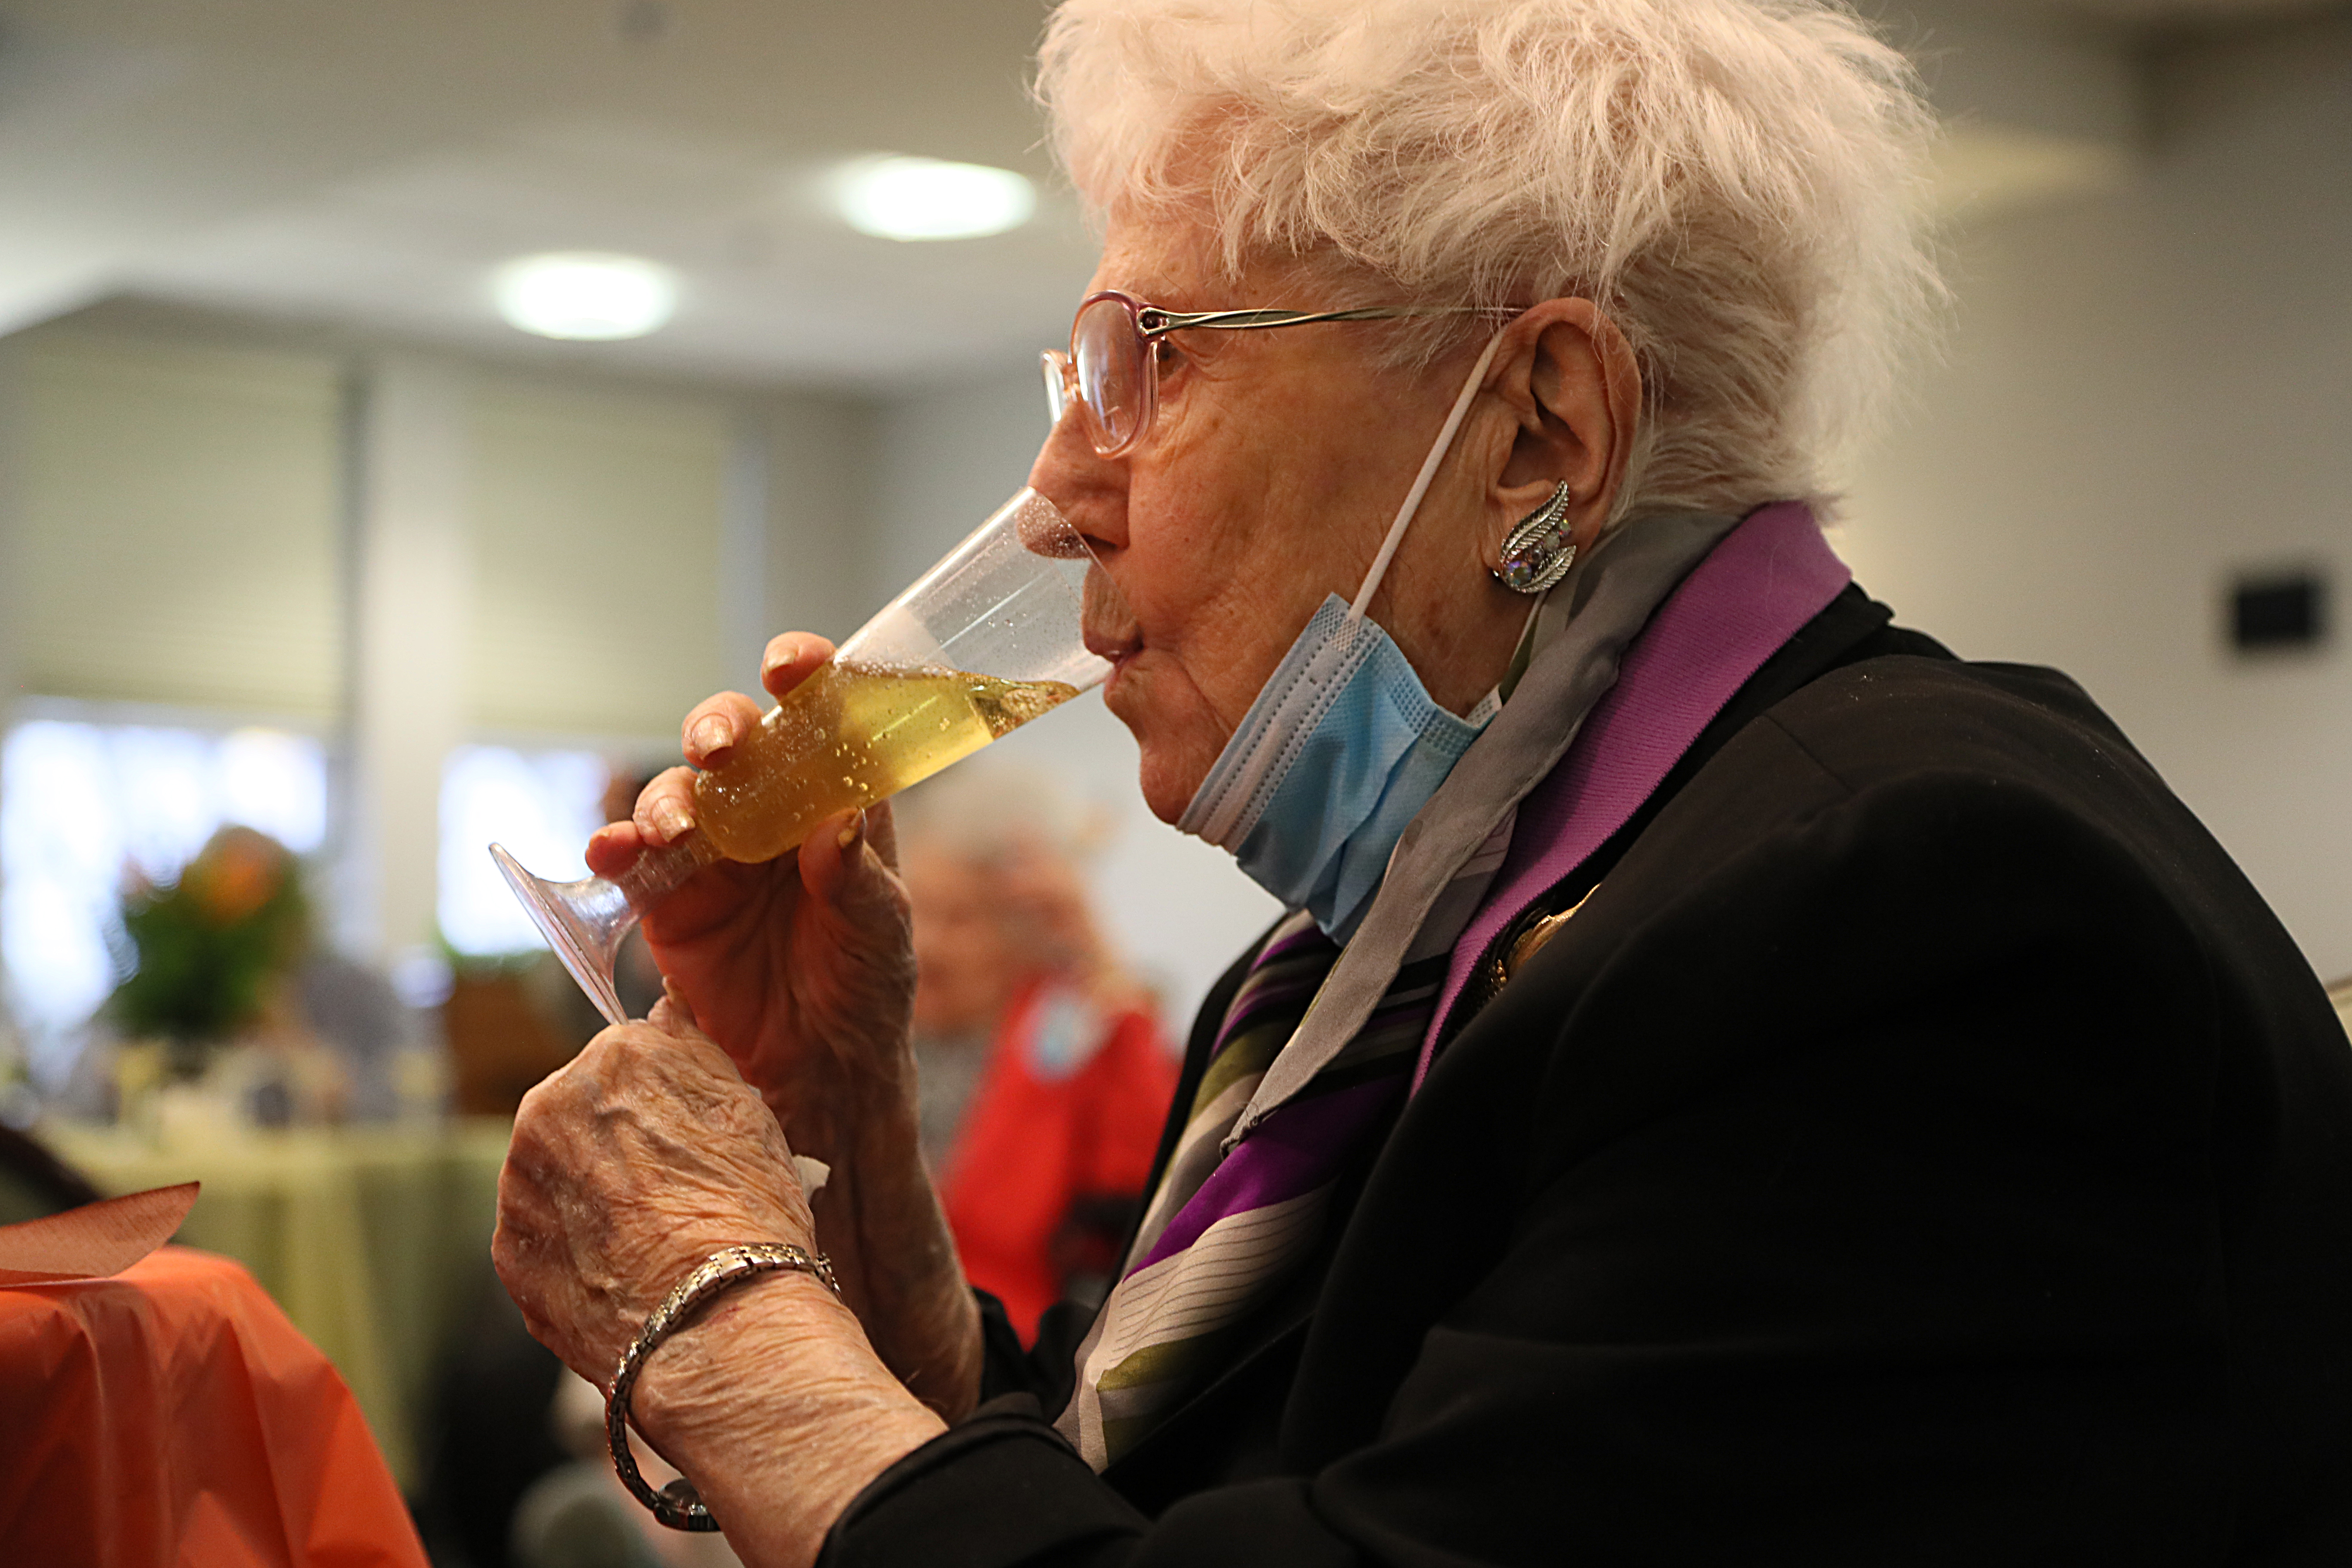 Thelma Tayor, 100, tasted sparkling cider during the party.  